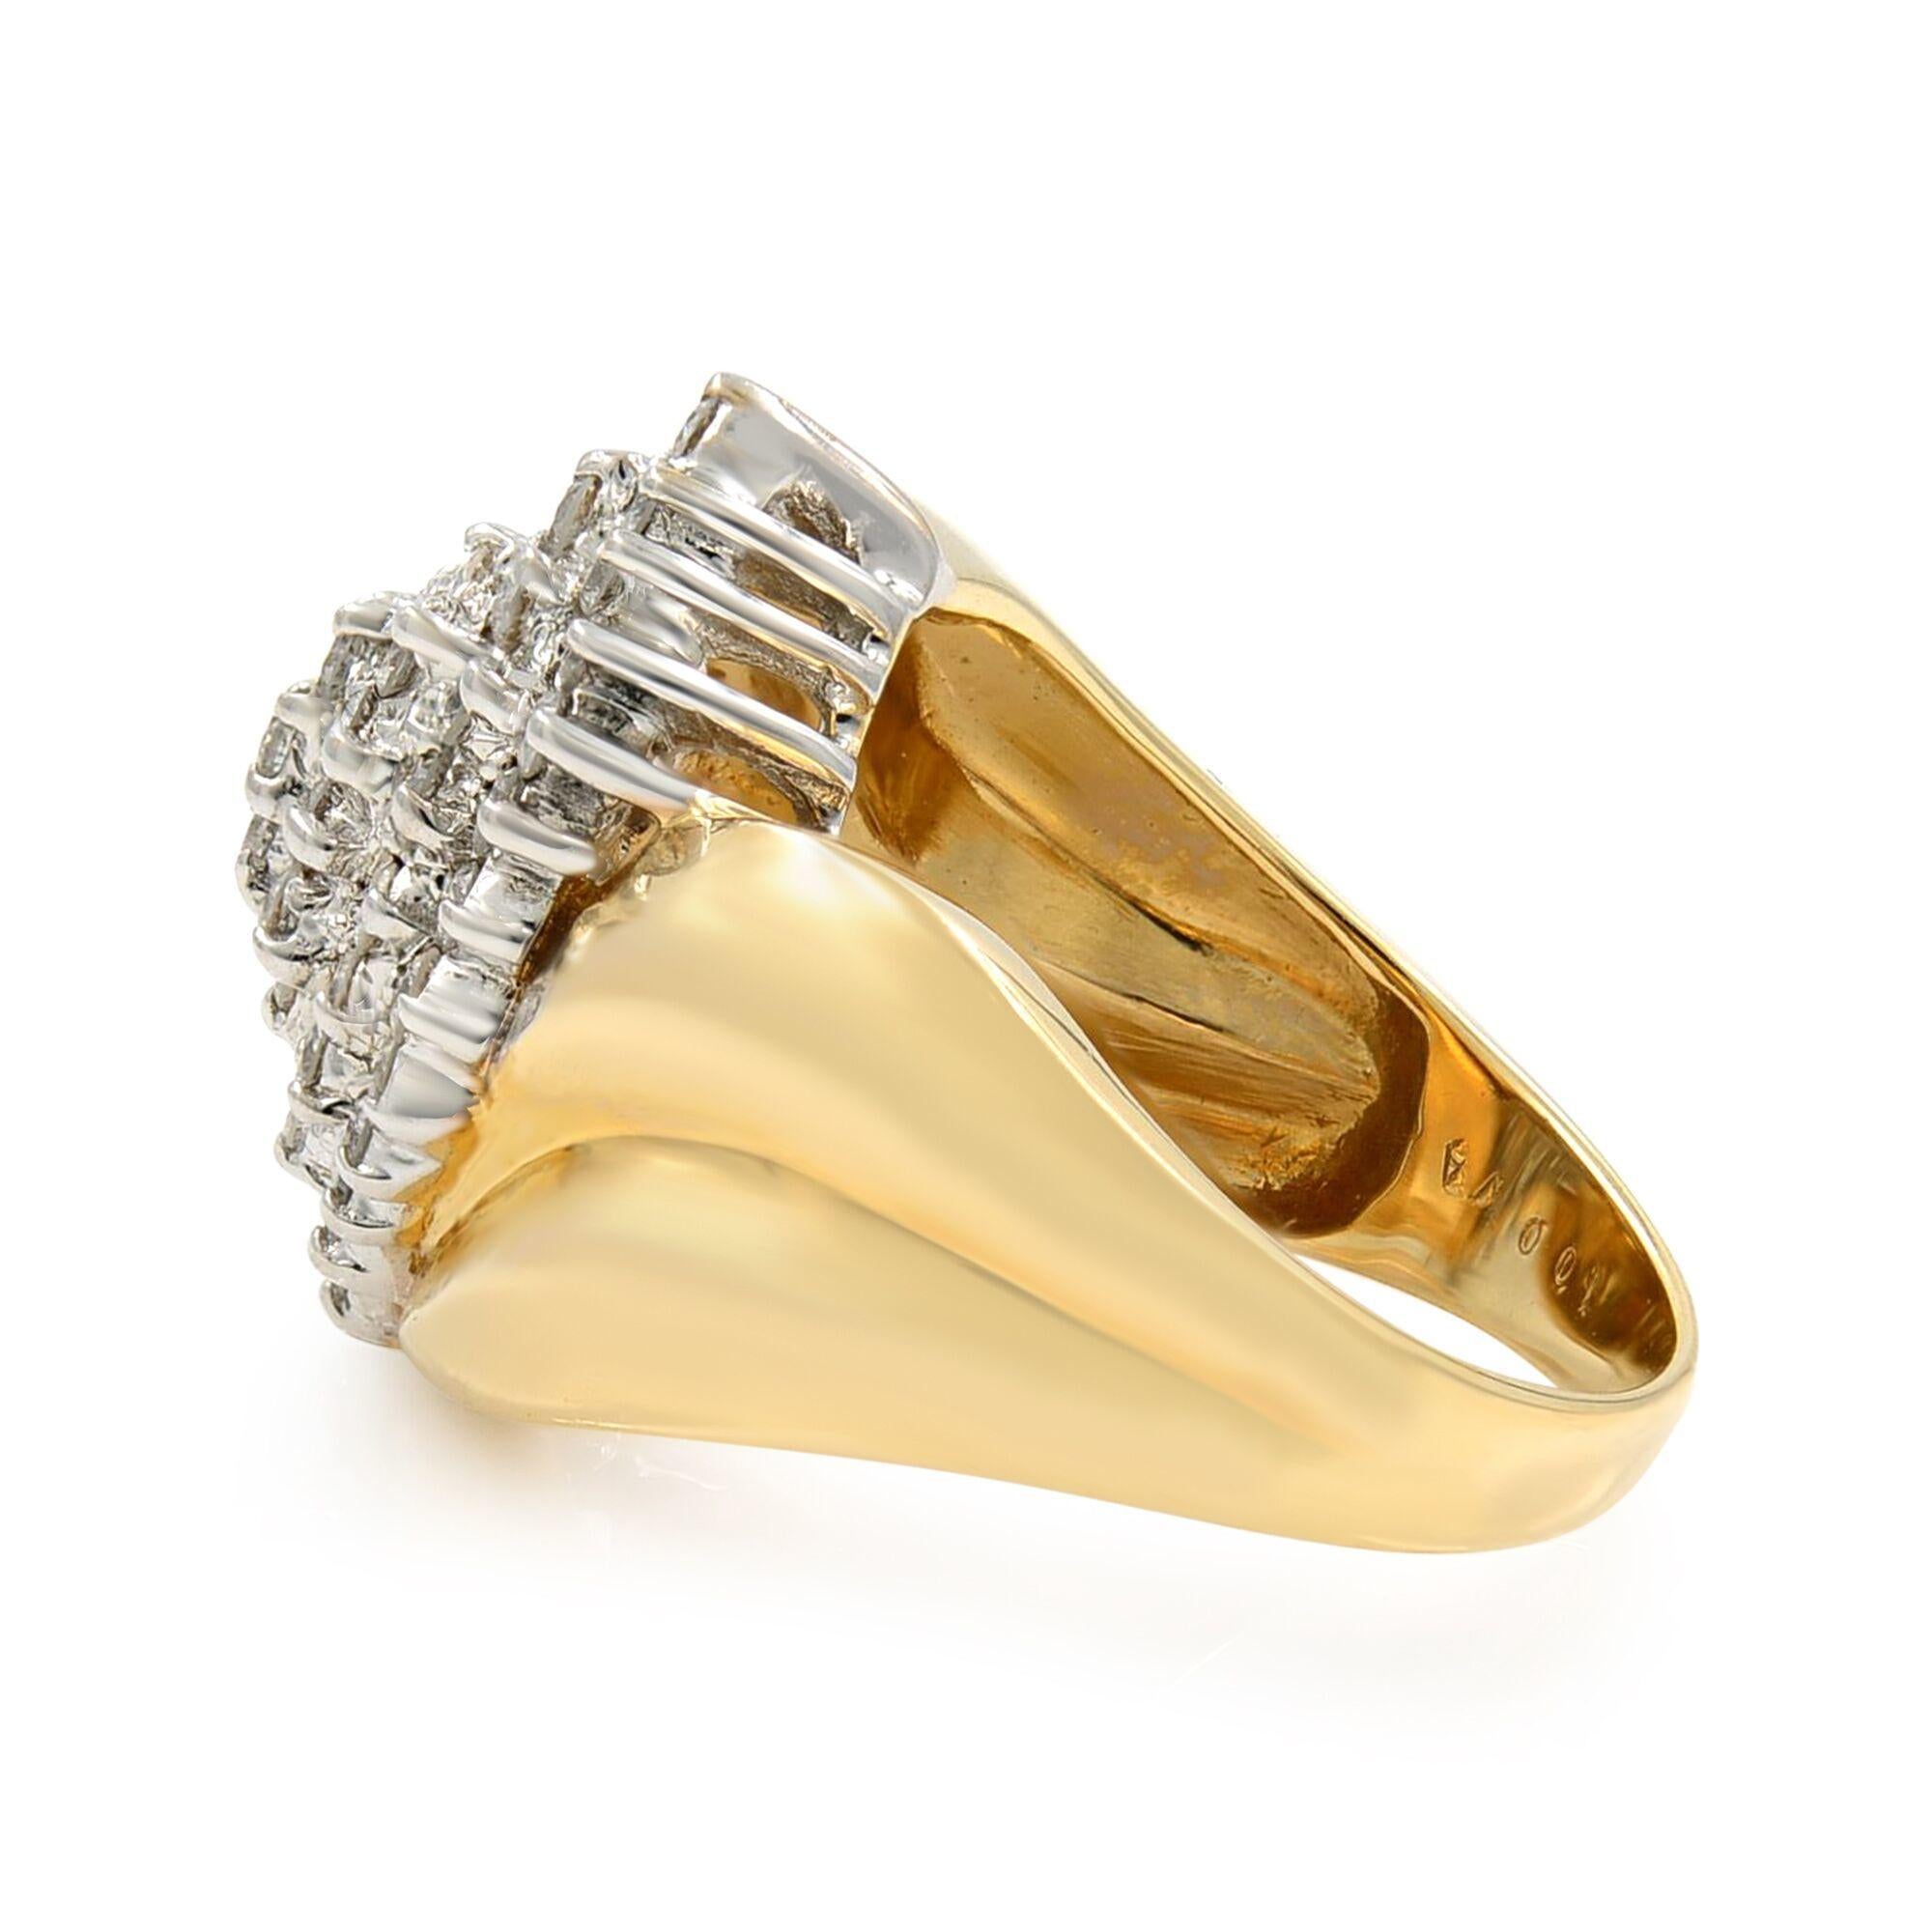 The Glamorous Pave Set right-hand ring in yellow gold is sure to spice up a regular day. It is ideal for anyone looking to have a retro pave diamond ring. It is composed of over 50 diamonds mounted on a wide 14k yellow gold band. Look like a star